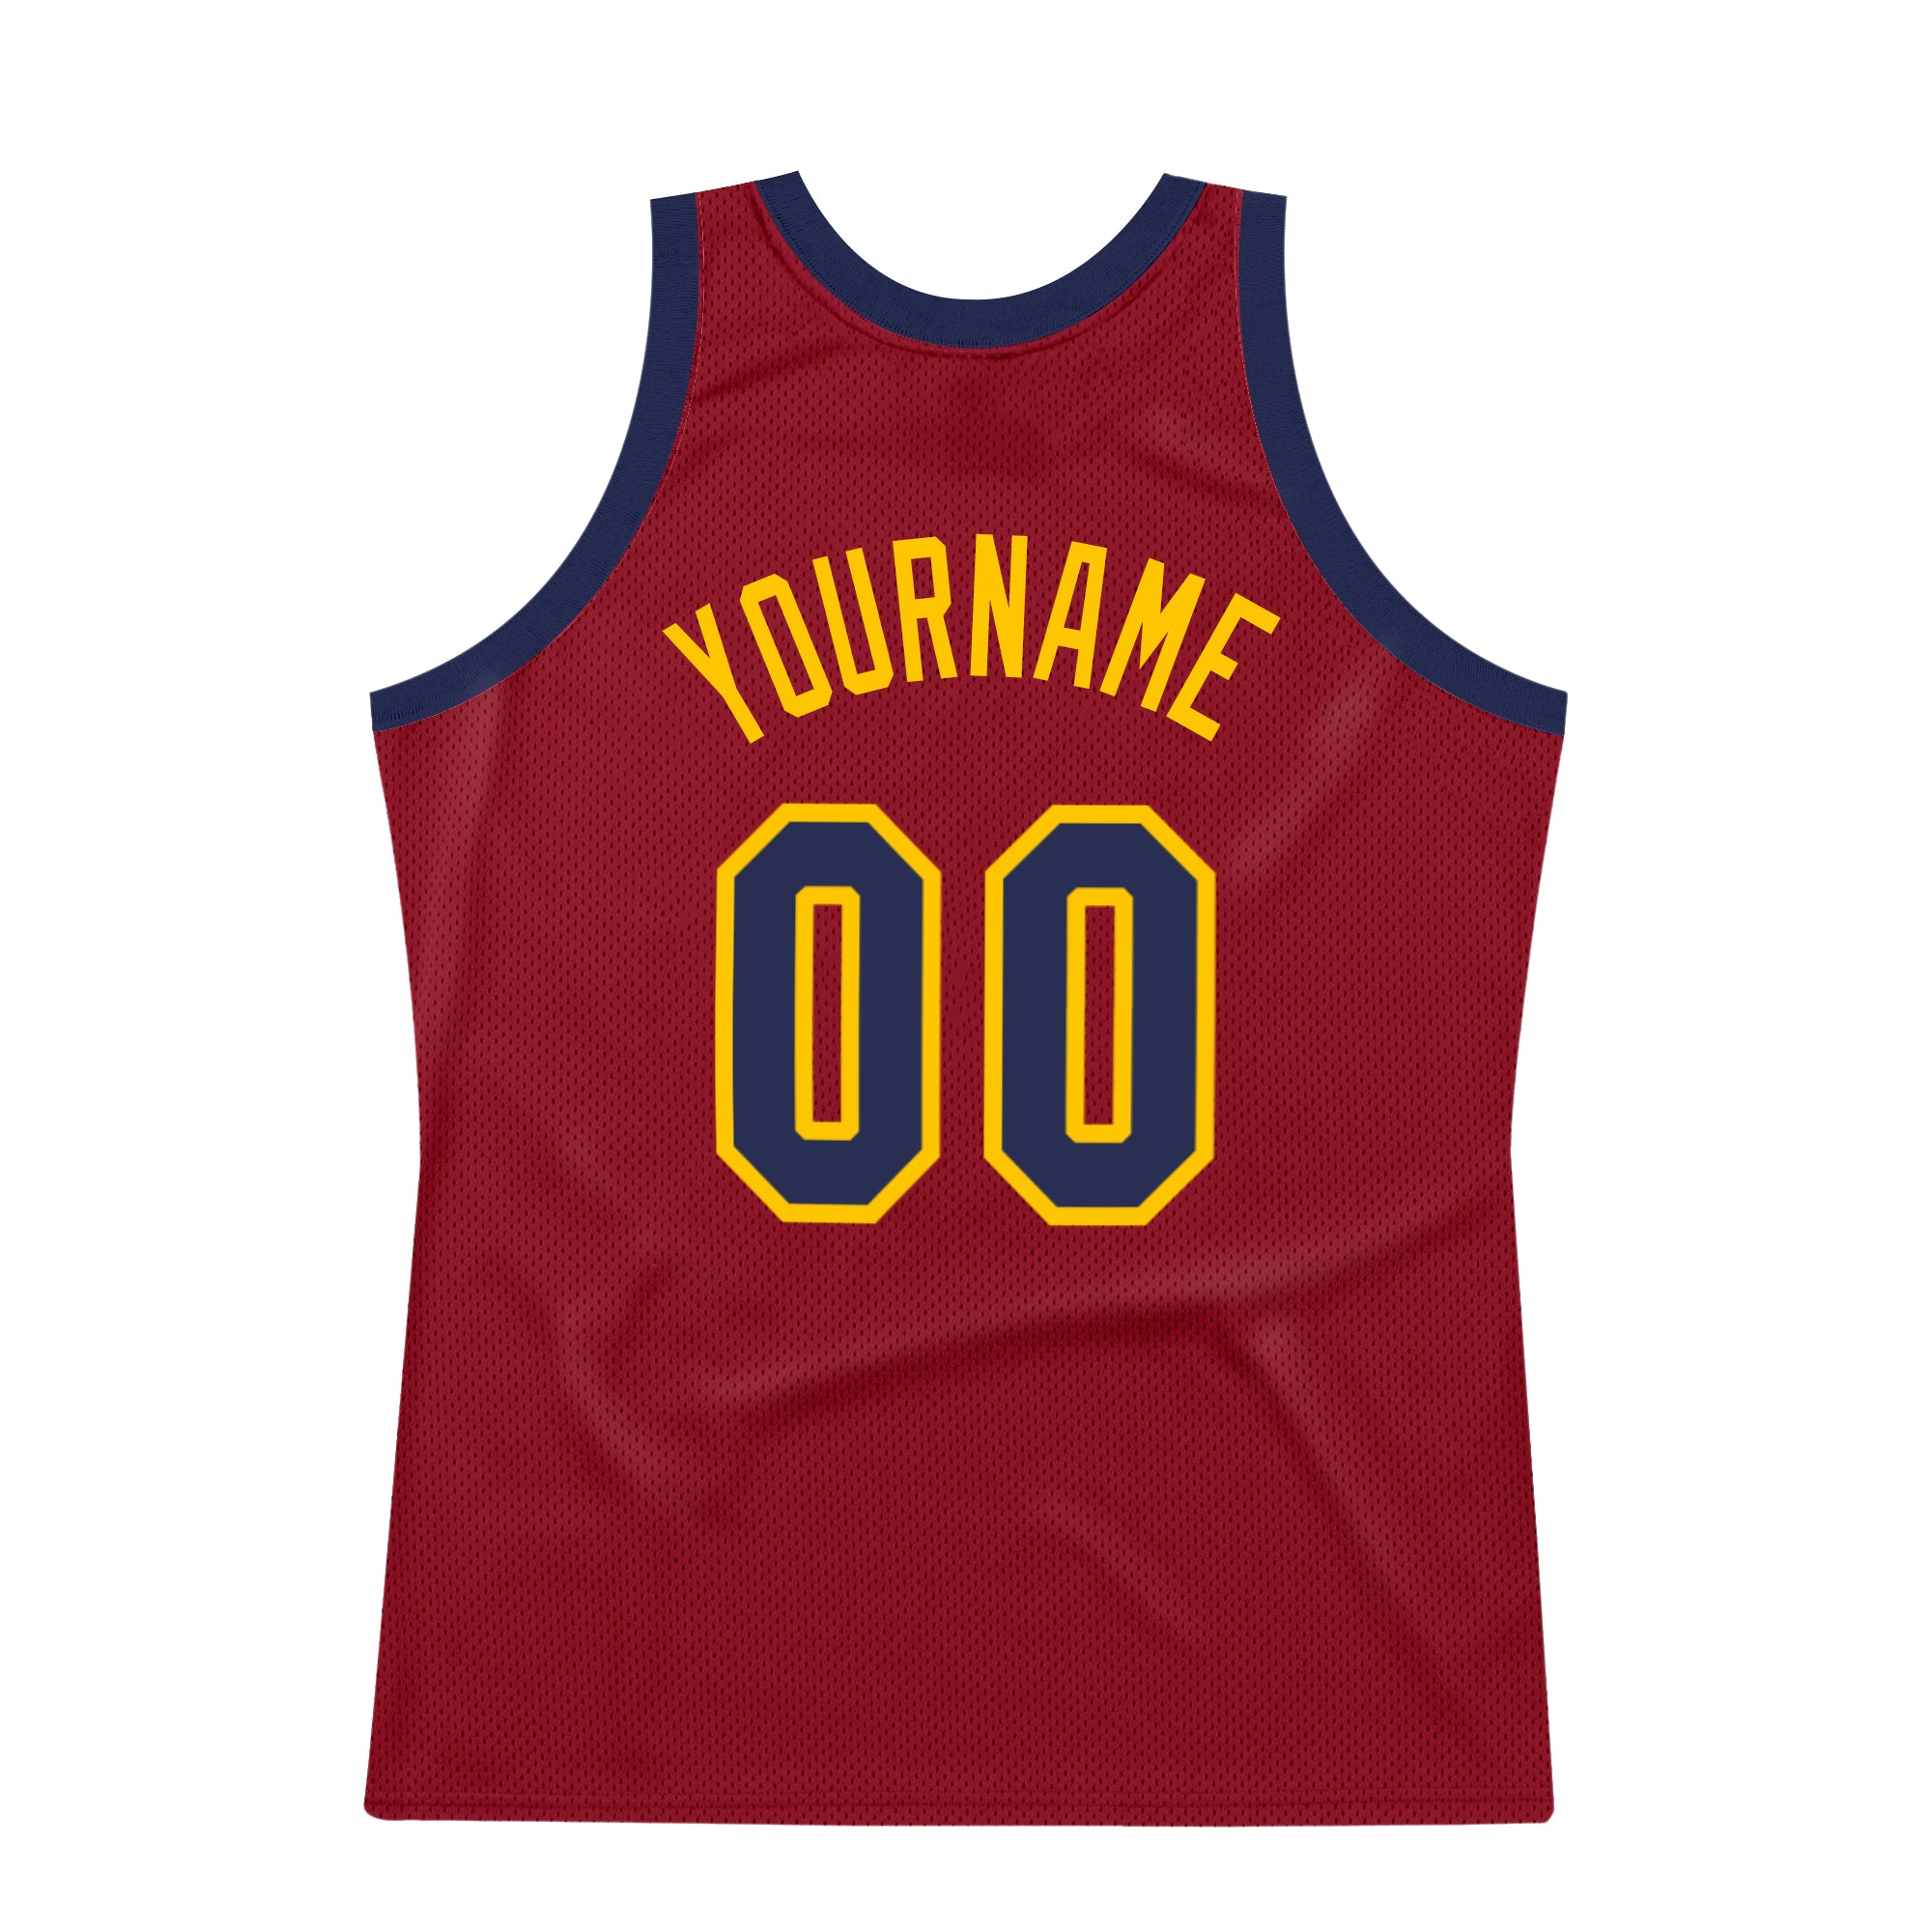 Cleveland Cavaliers Nike Authentic Custom Jersey Maroon - Icon Edition